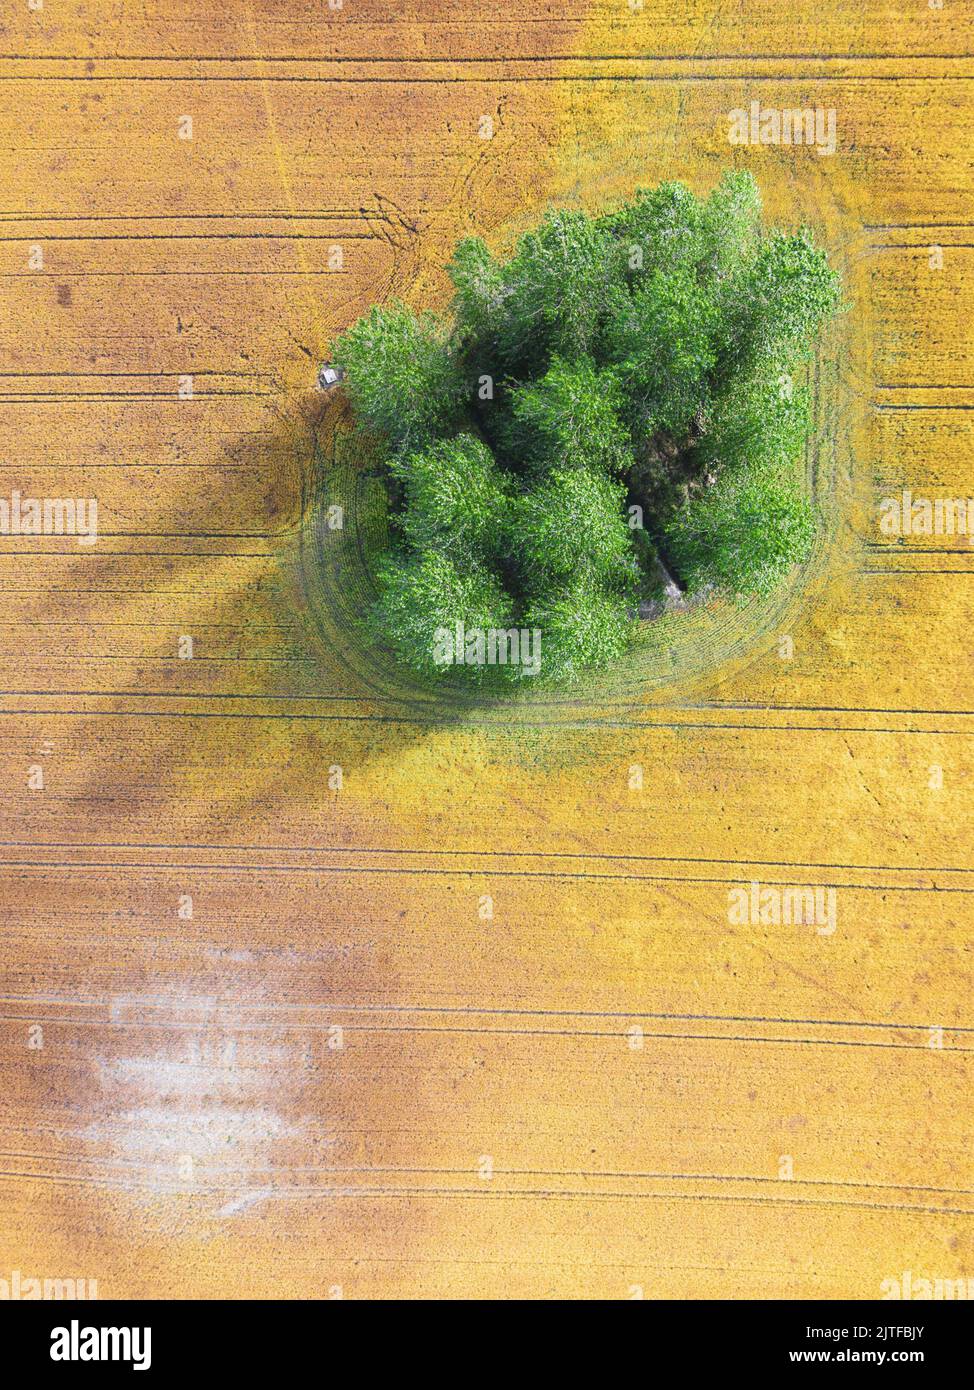 Aerial view of a single tree in an agricultural field full of wheat crop. Farmland used for growing crops viewed from above. Stock Photo